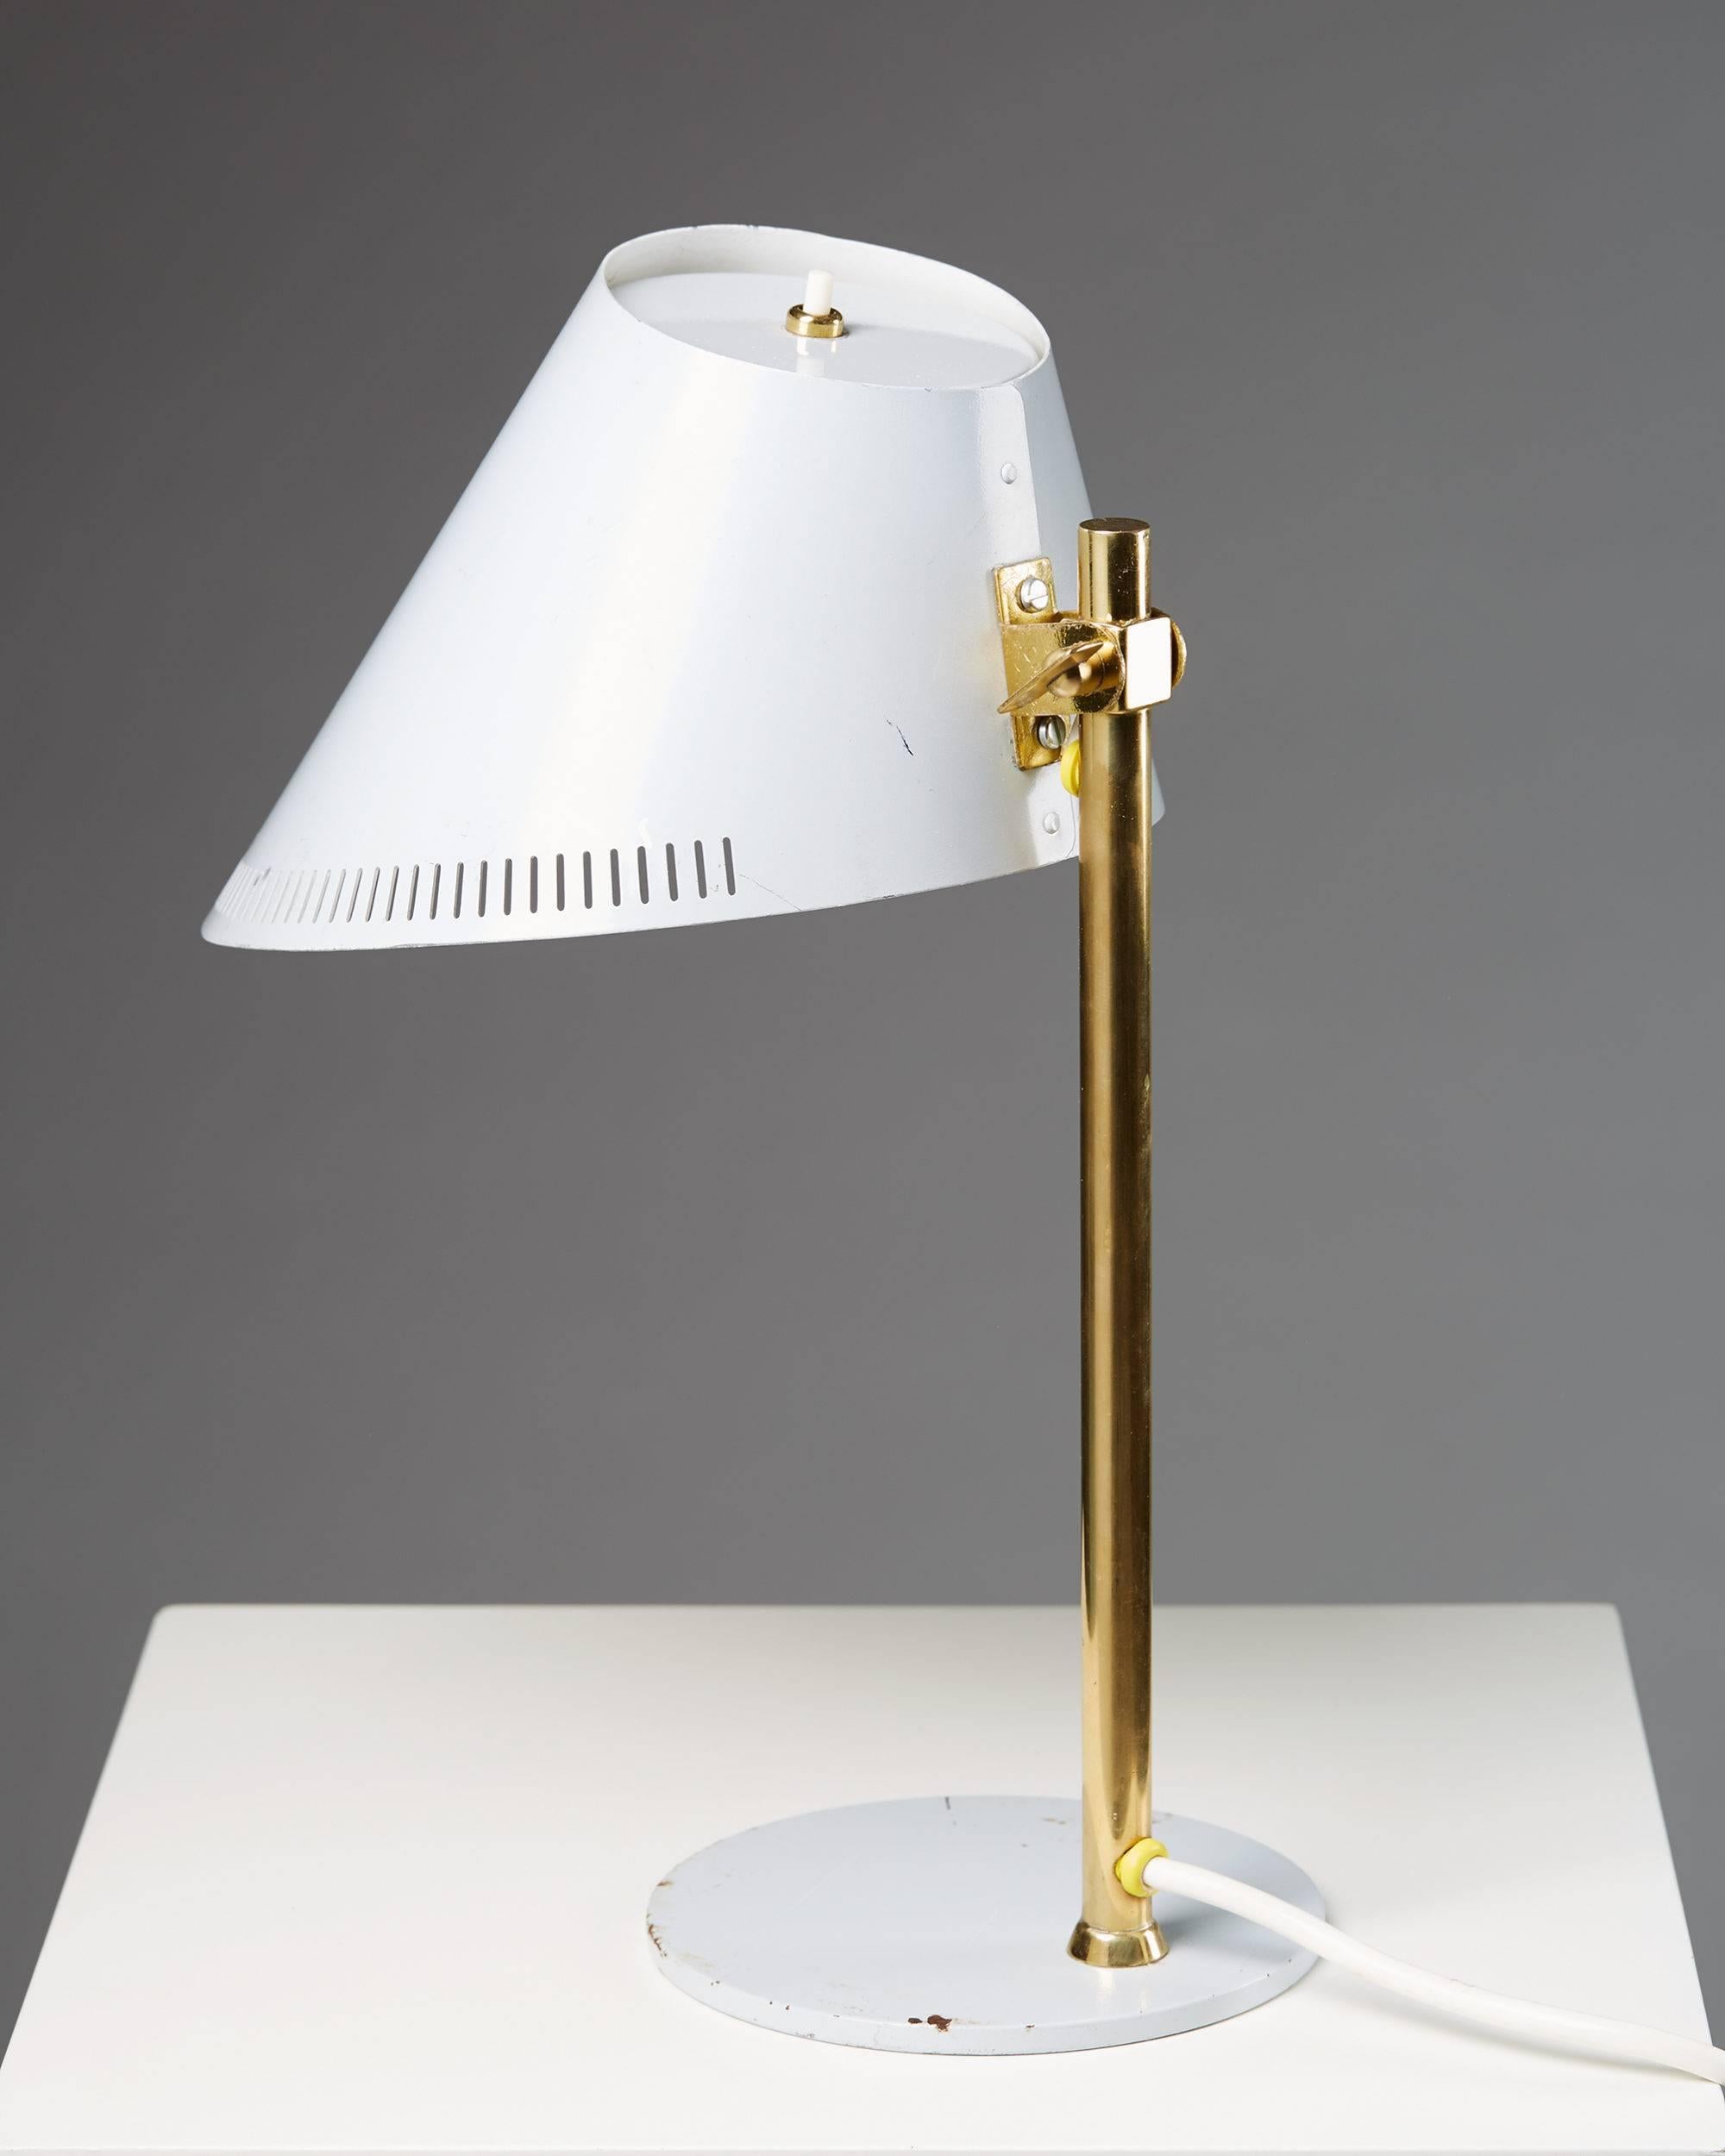 Table lamp designed by Paavo Tynell for Idman, Finland. 1950s.
Lacqured steel and brass.

Measures: 16.93 in.H x 11.81 in. W x 10.63 in.
D
43 cm H x 30 cm W x 27 cm D.